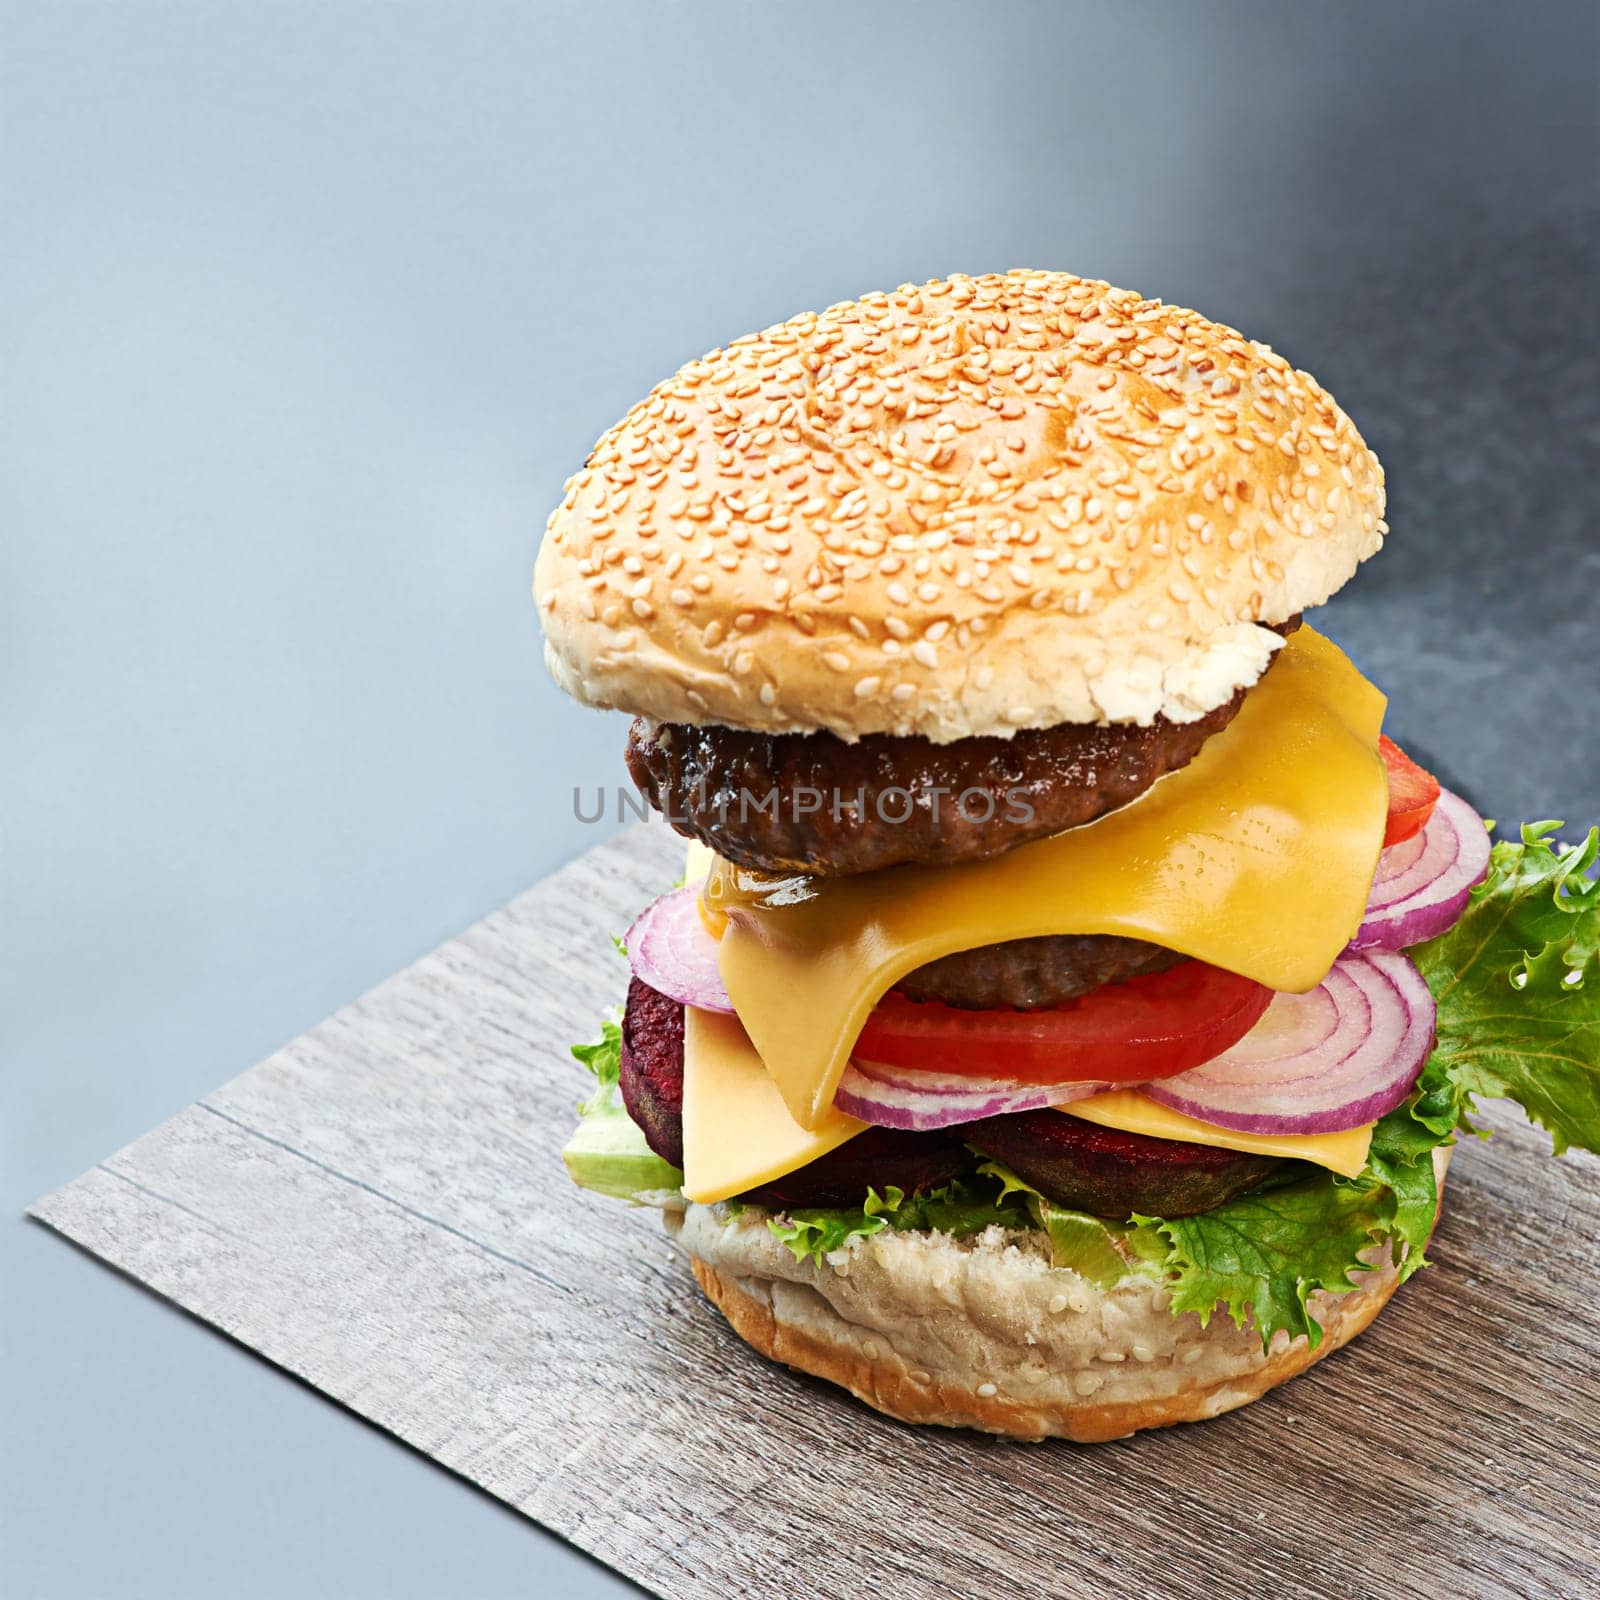 Beef, burger and cheese on menu in restaurant with lettuce, tomato and onion on sesame bun in kitchen. Bbq, hamburger and fast food with meat and salad from fine dining diner for dinner or lunch by YuriArcurs